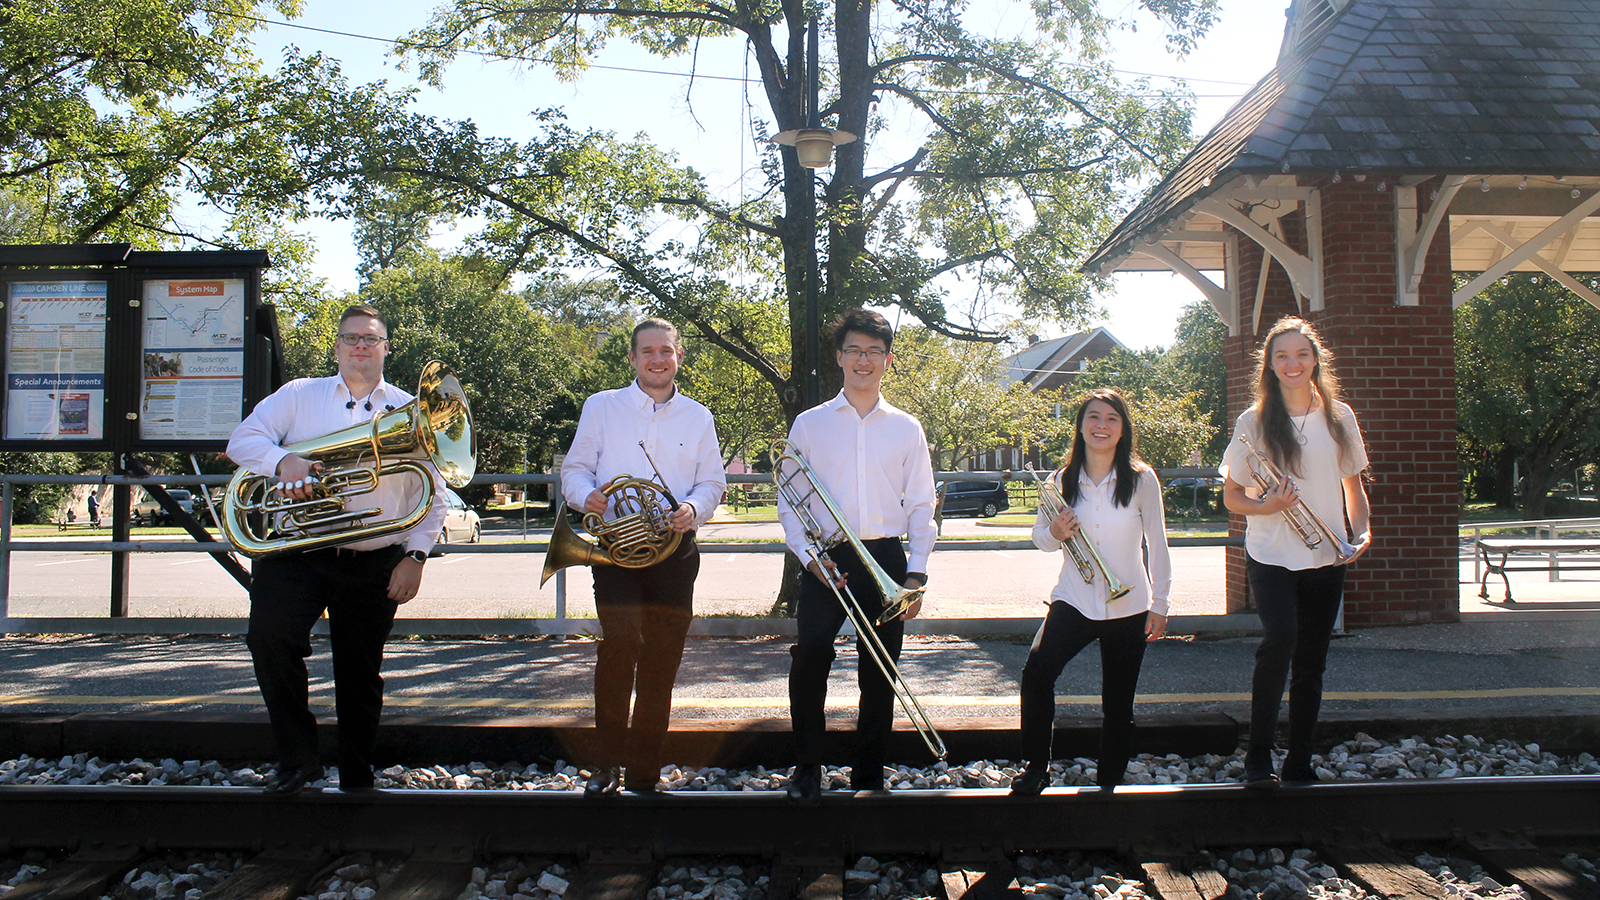  The five graduate students of Terrapin Brass stand on the train tracks holding their brass instruments and smiling.